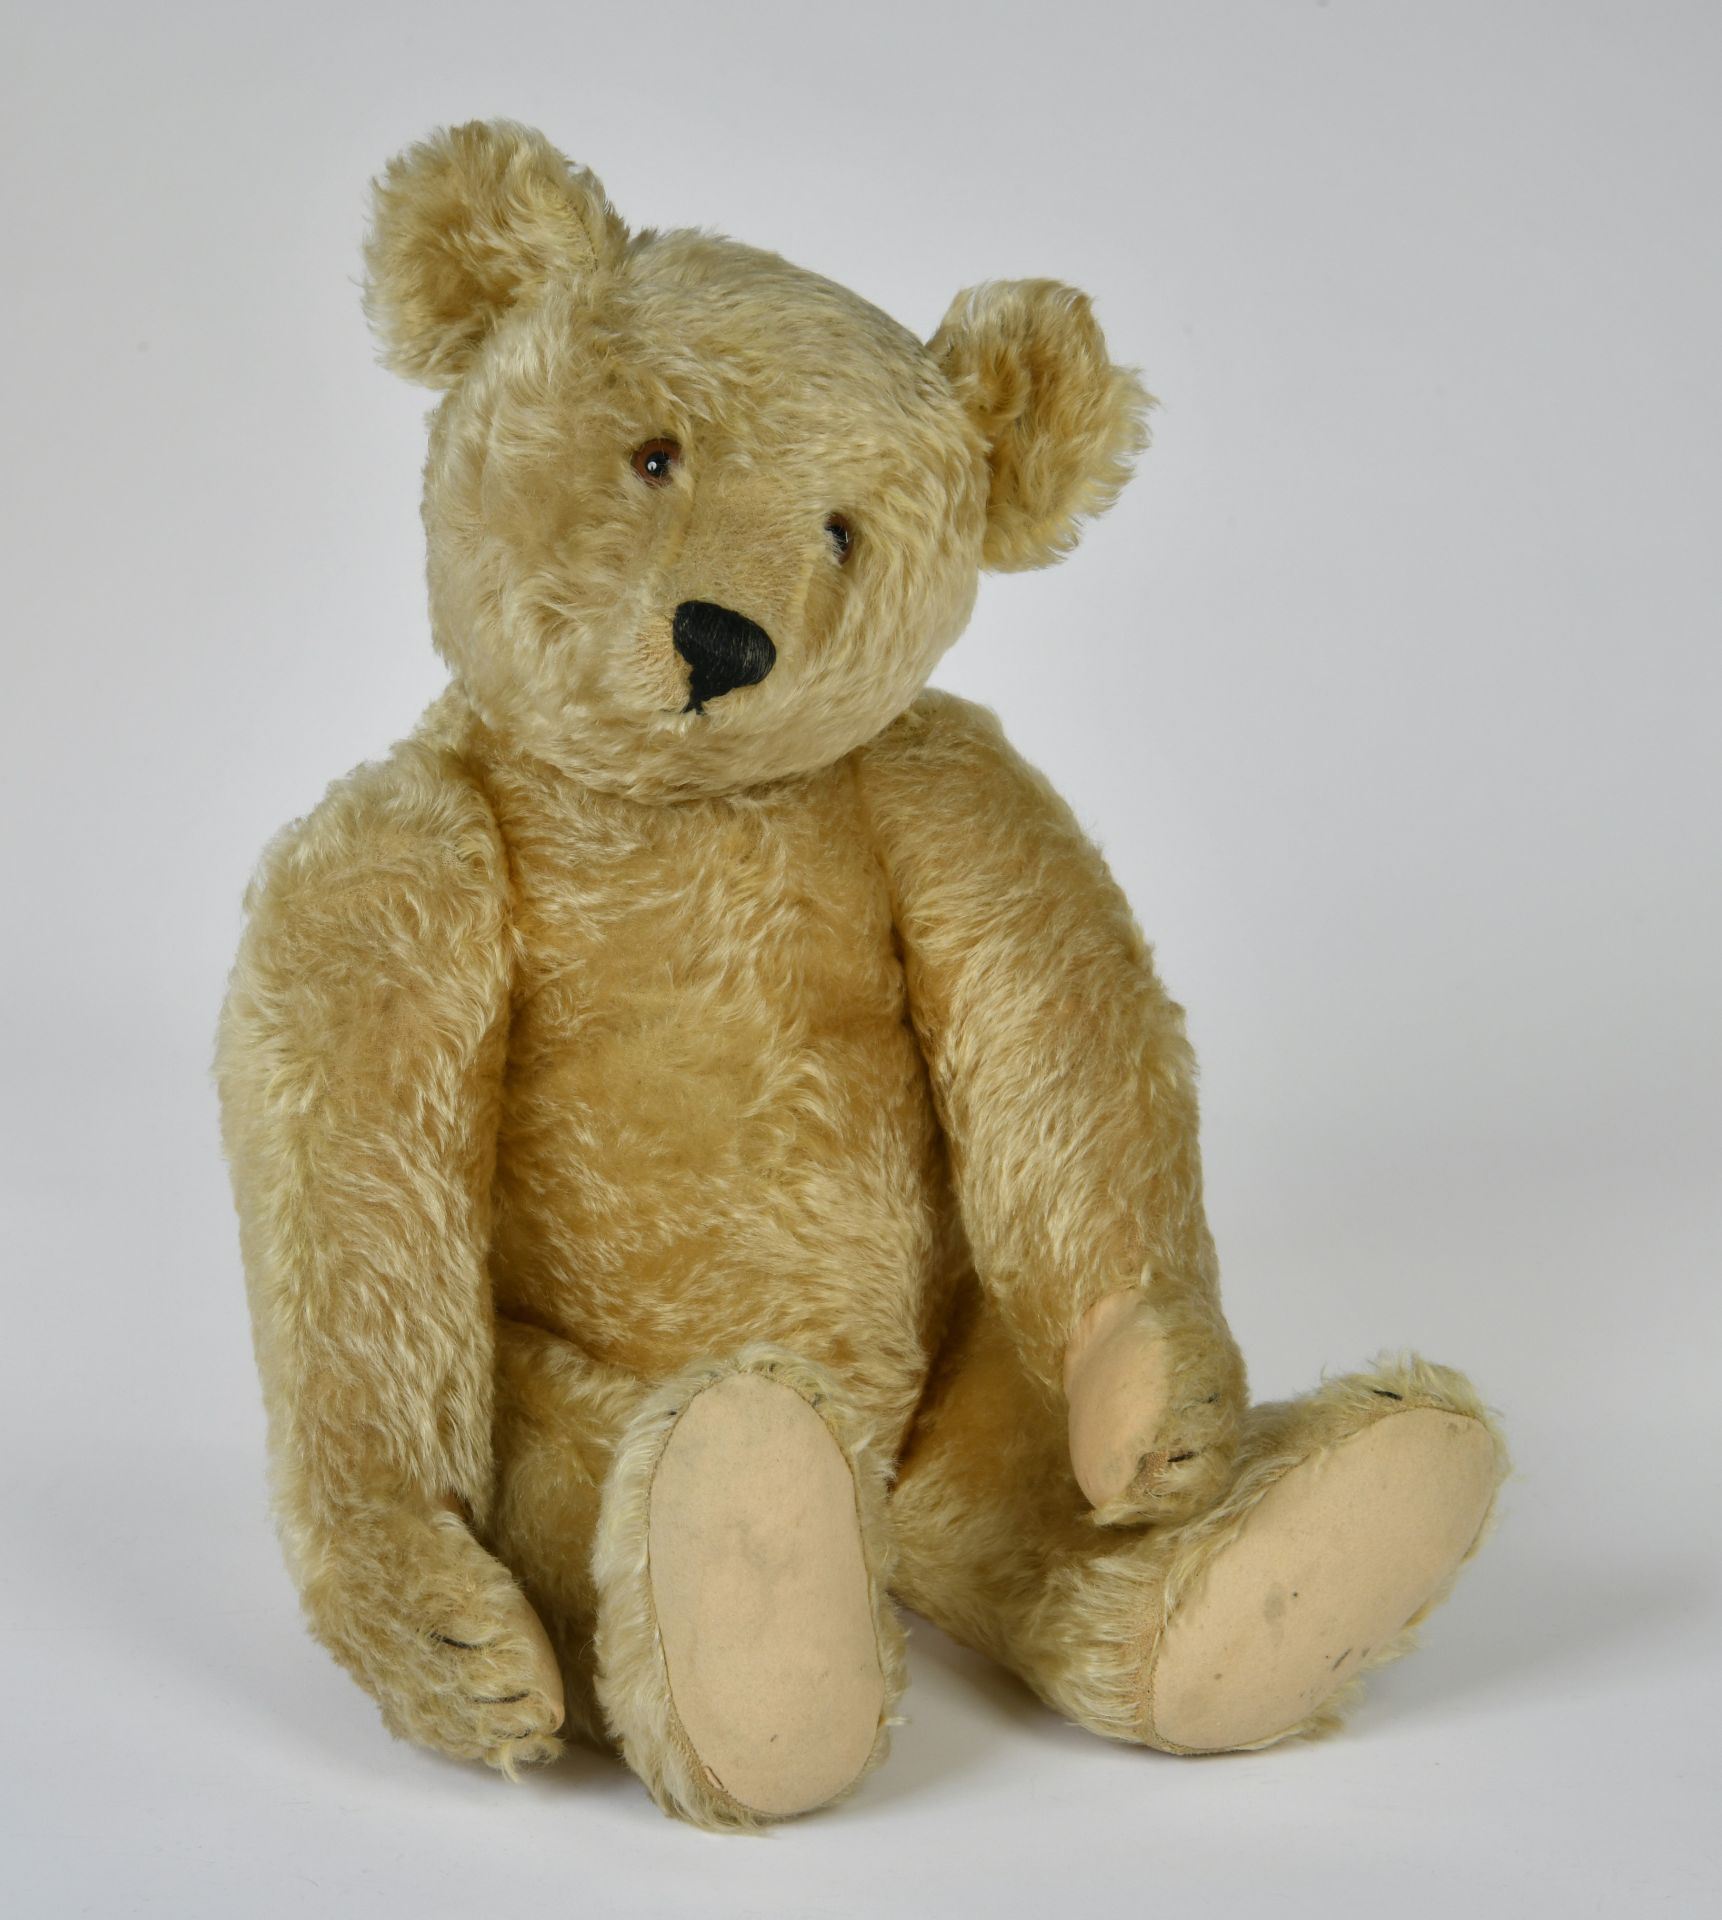 Steiff, bear, 60 cm, ca. 1920s, yellow, with buttom, expressive, very good condition